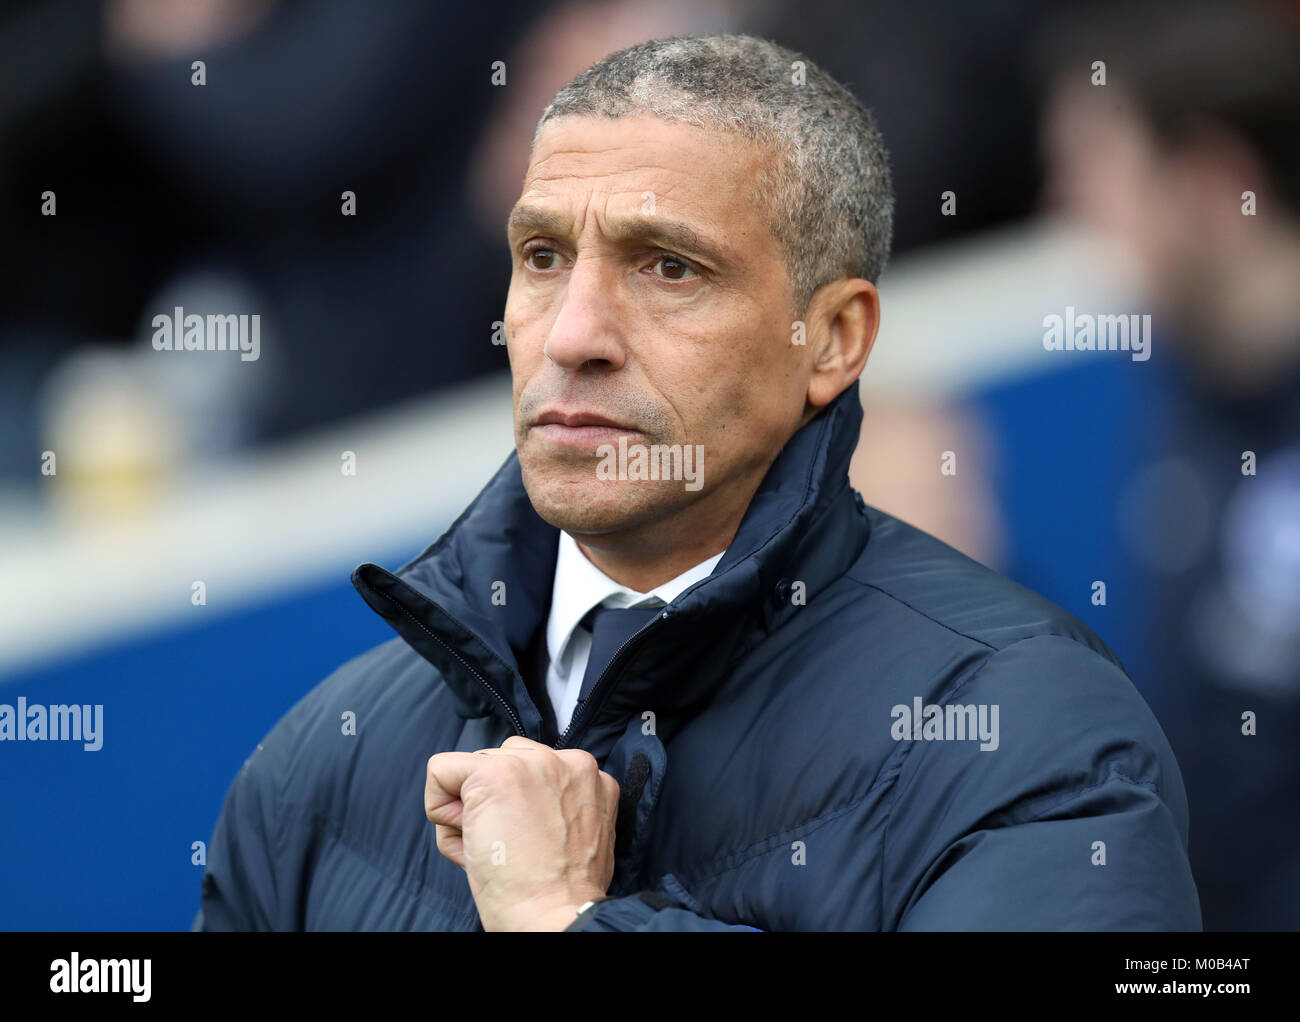 Brighton & Hove Albion manager Chris Hughton during the Premier League match at the AMEX Stadium, Brighton. PRESS ASSOCIATION Photo. Picture date: Saturday January 20, 2018. See PA story SOCCER Brighton. Photo credit should read: Gareth Fuller/PA Wire. RESTRICTIONS: No use with unauthorised audio, video, data, fixture lists, club/league logos or 'live' services. Online in-match use limited to 75 images, no video emulation. No use in betting, games or single club/league/player publications. Stock Photo